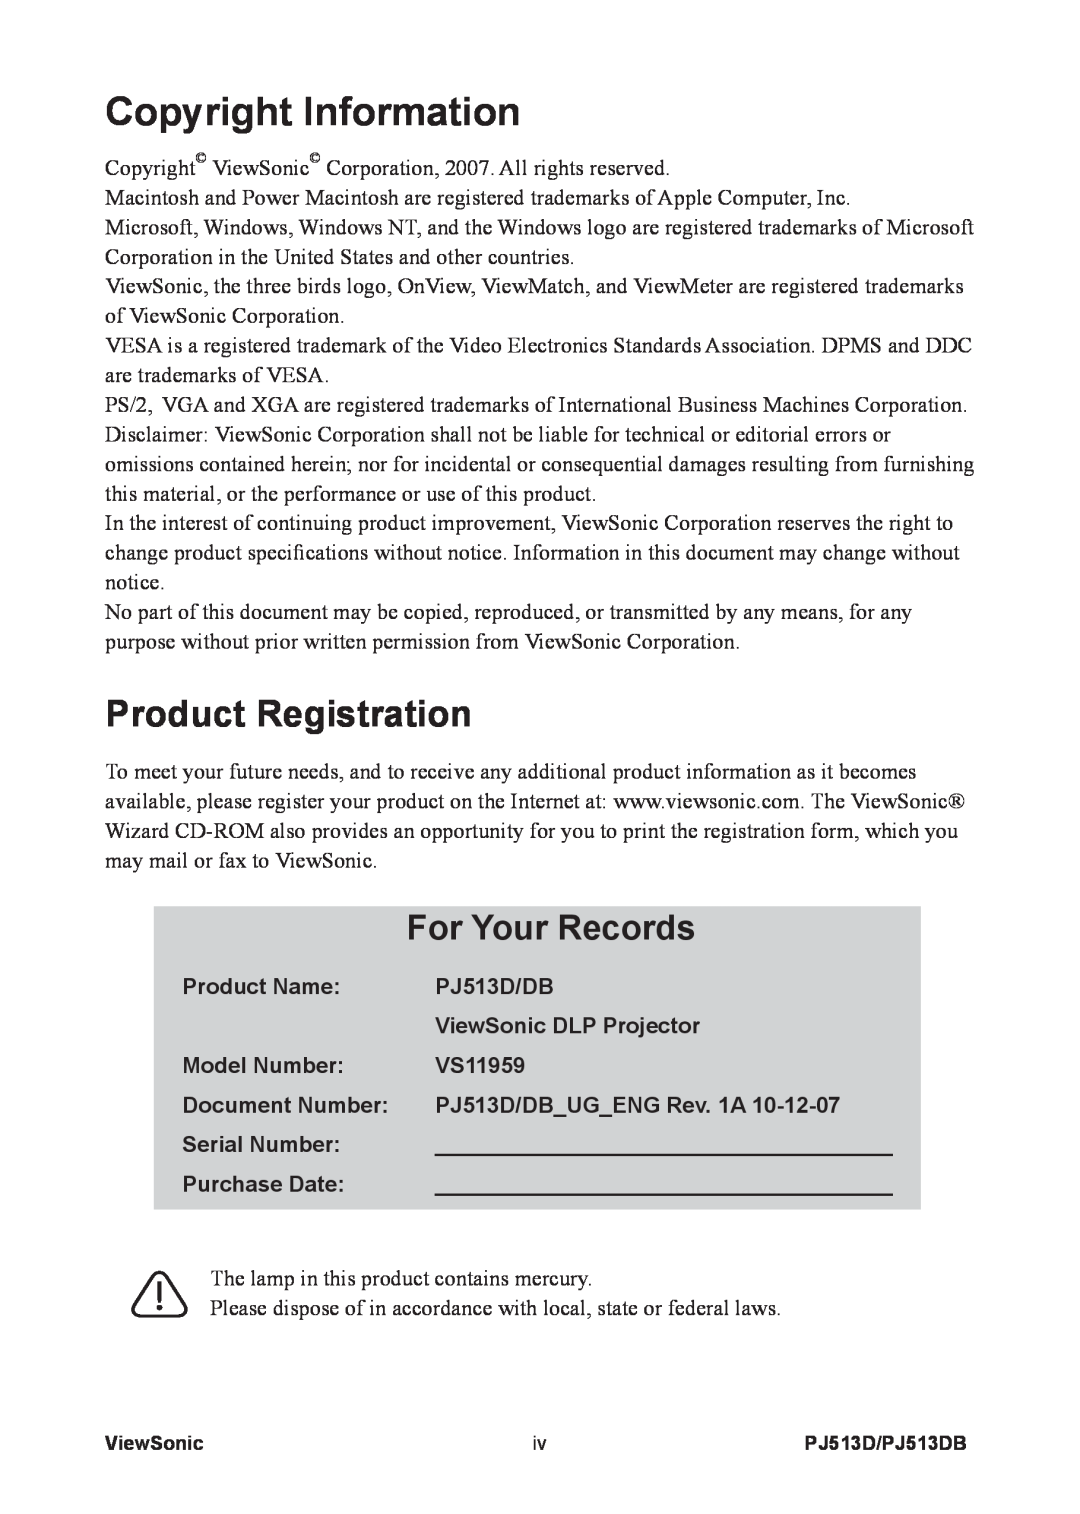 ViewSonic Product Registration, Copyright Information, For Your Records, Product Name, PJ513D/DB, Model Number, VS11959 